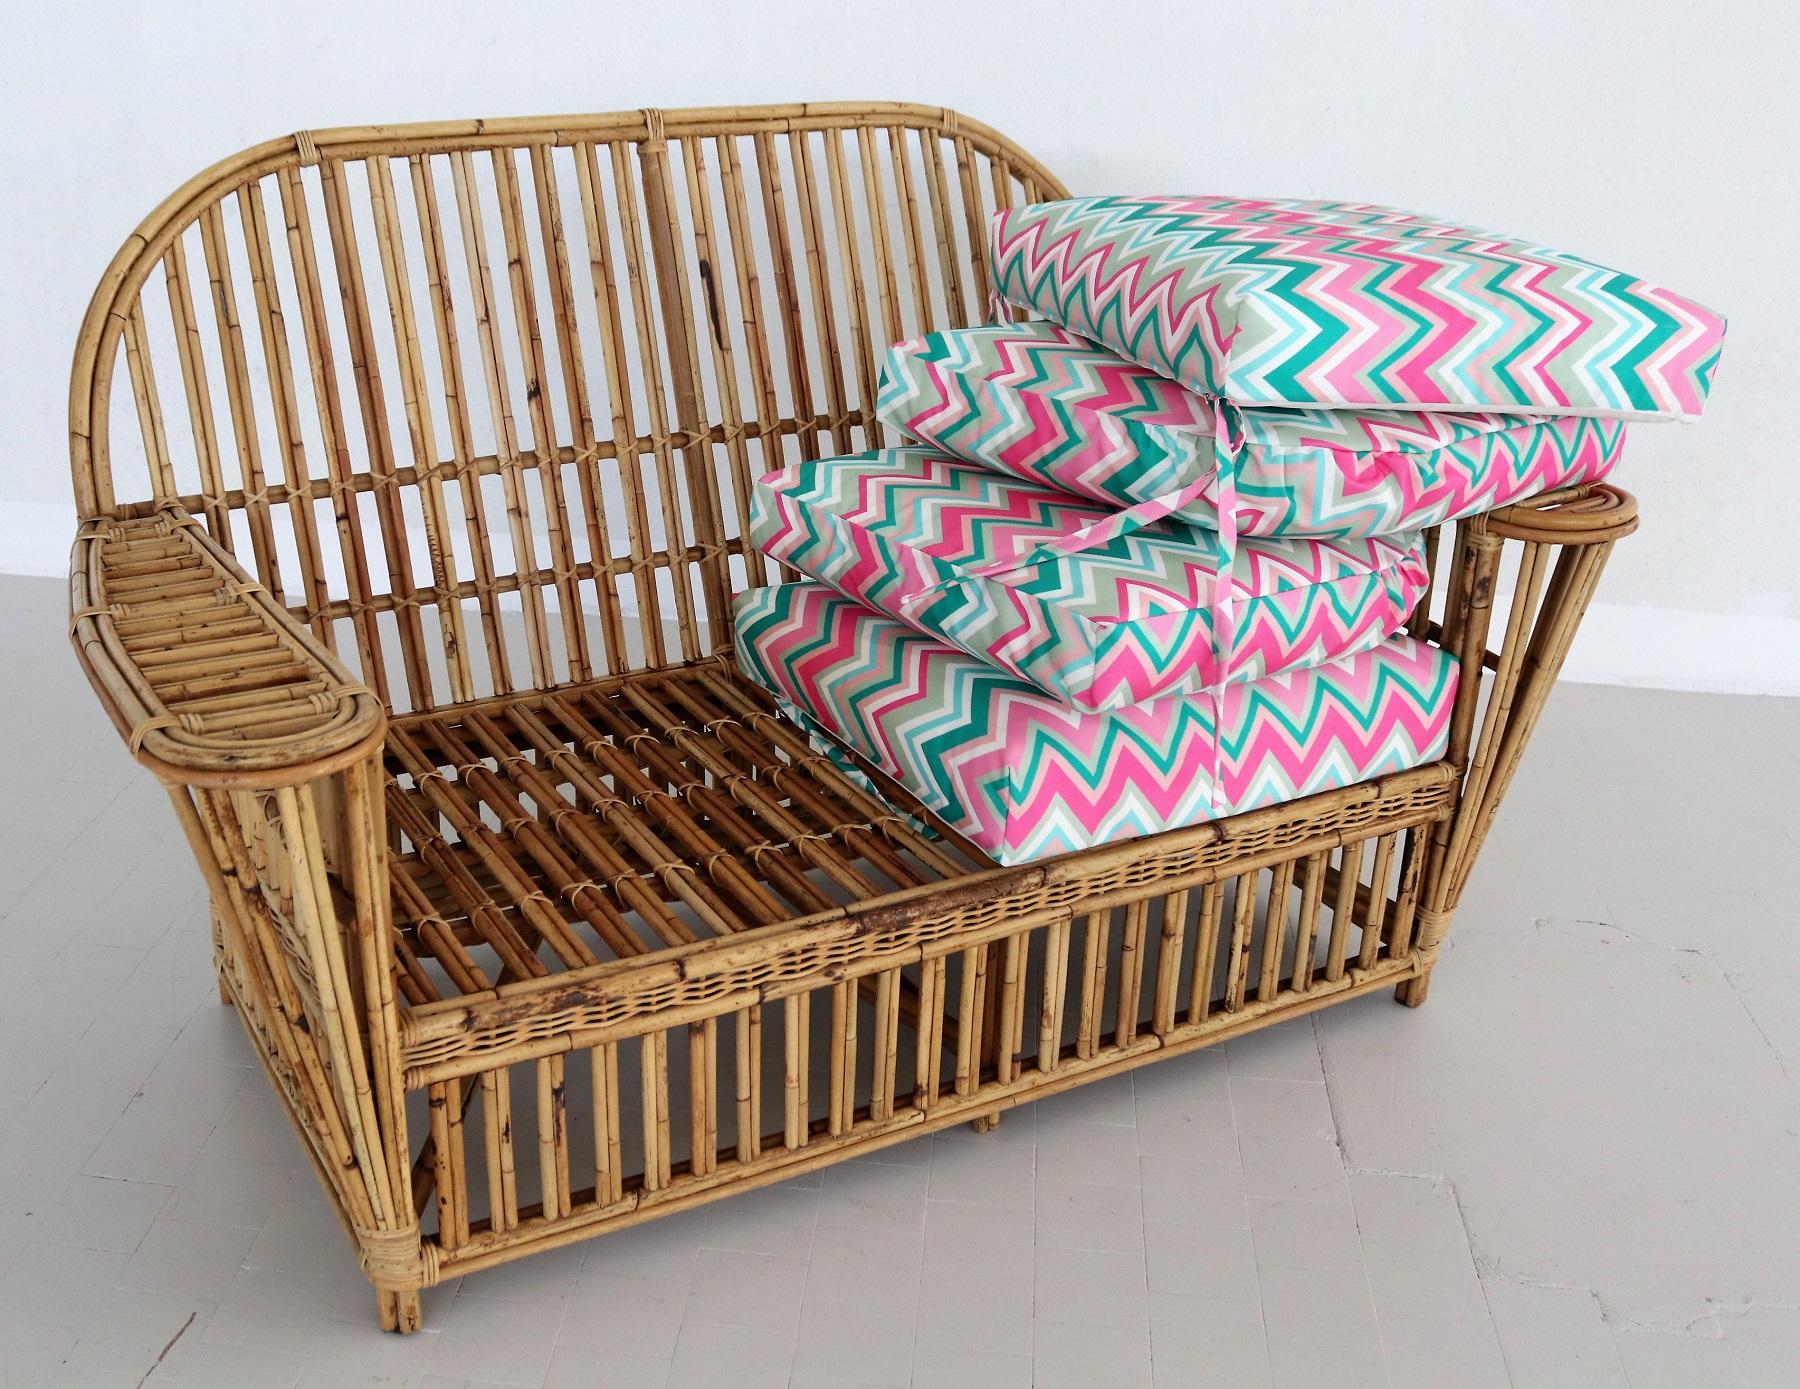 Italian Mid-Century Bamboo and Rattan Sofa with new Upholstery, 1970s For Sale 6